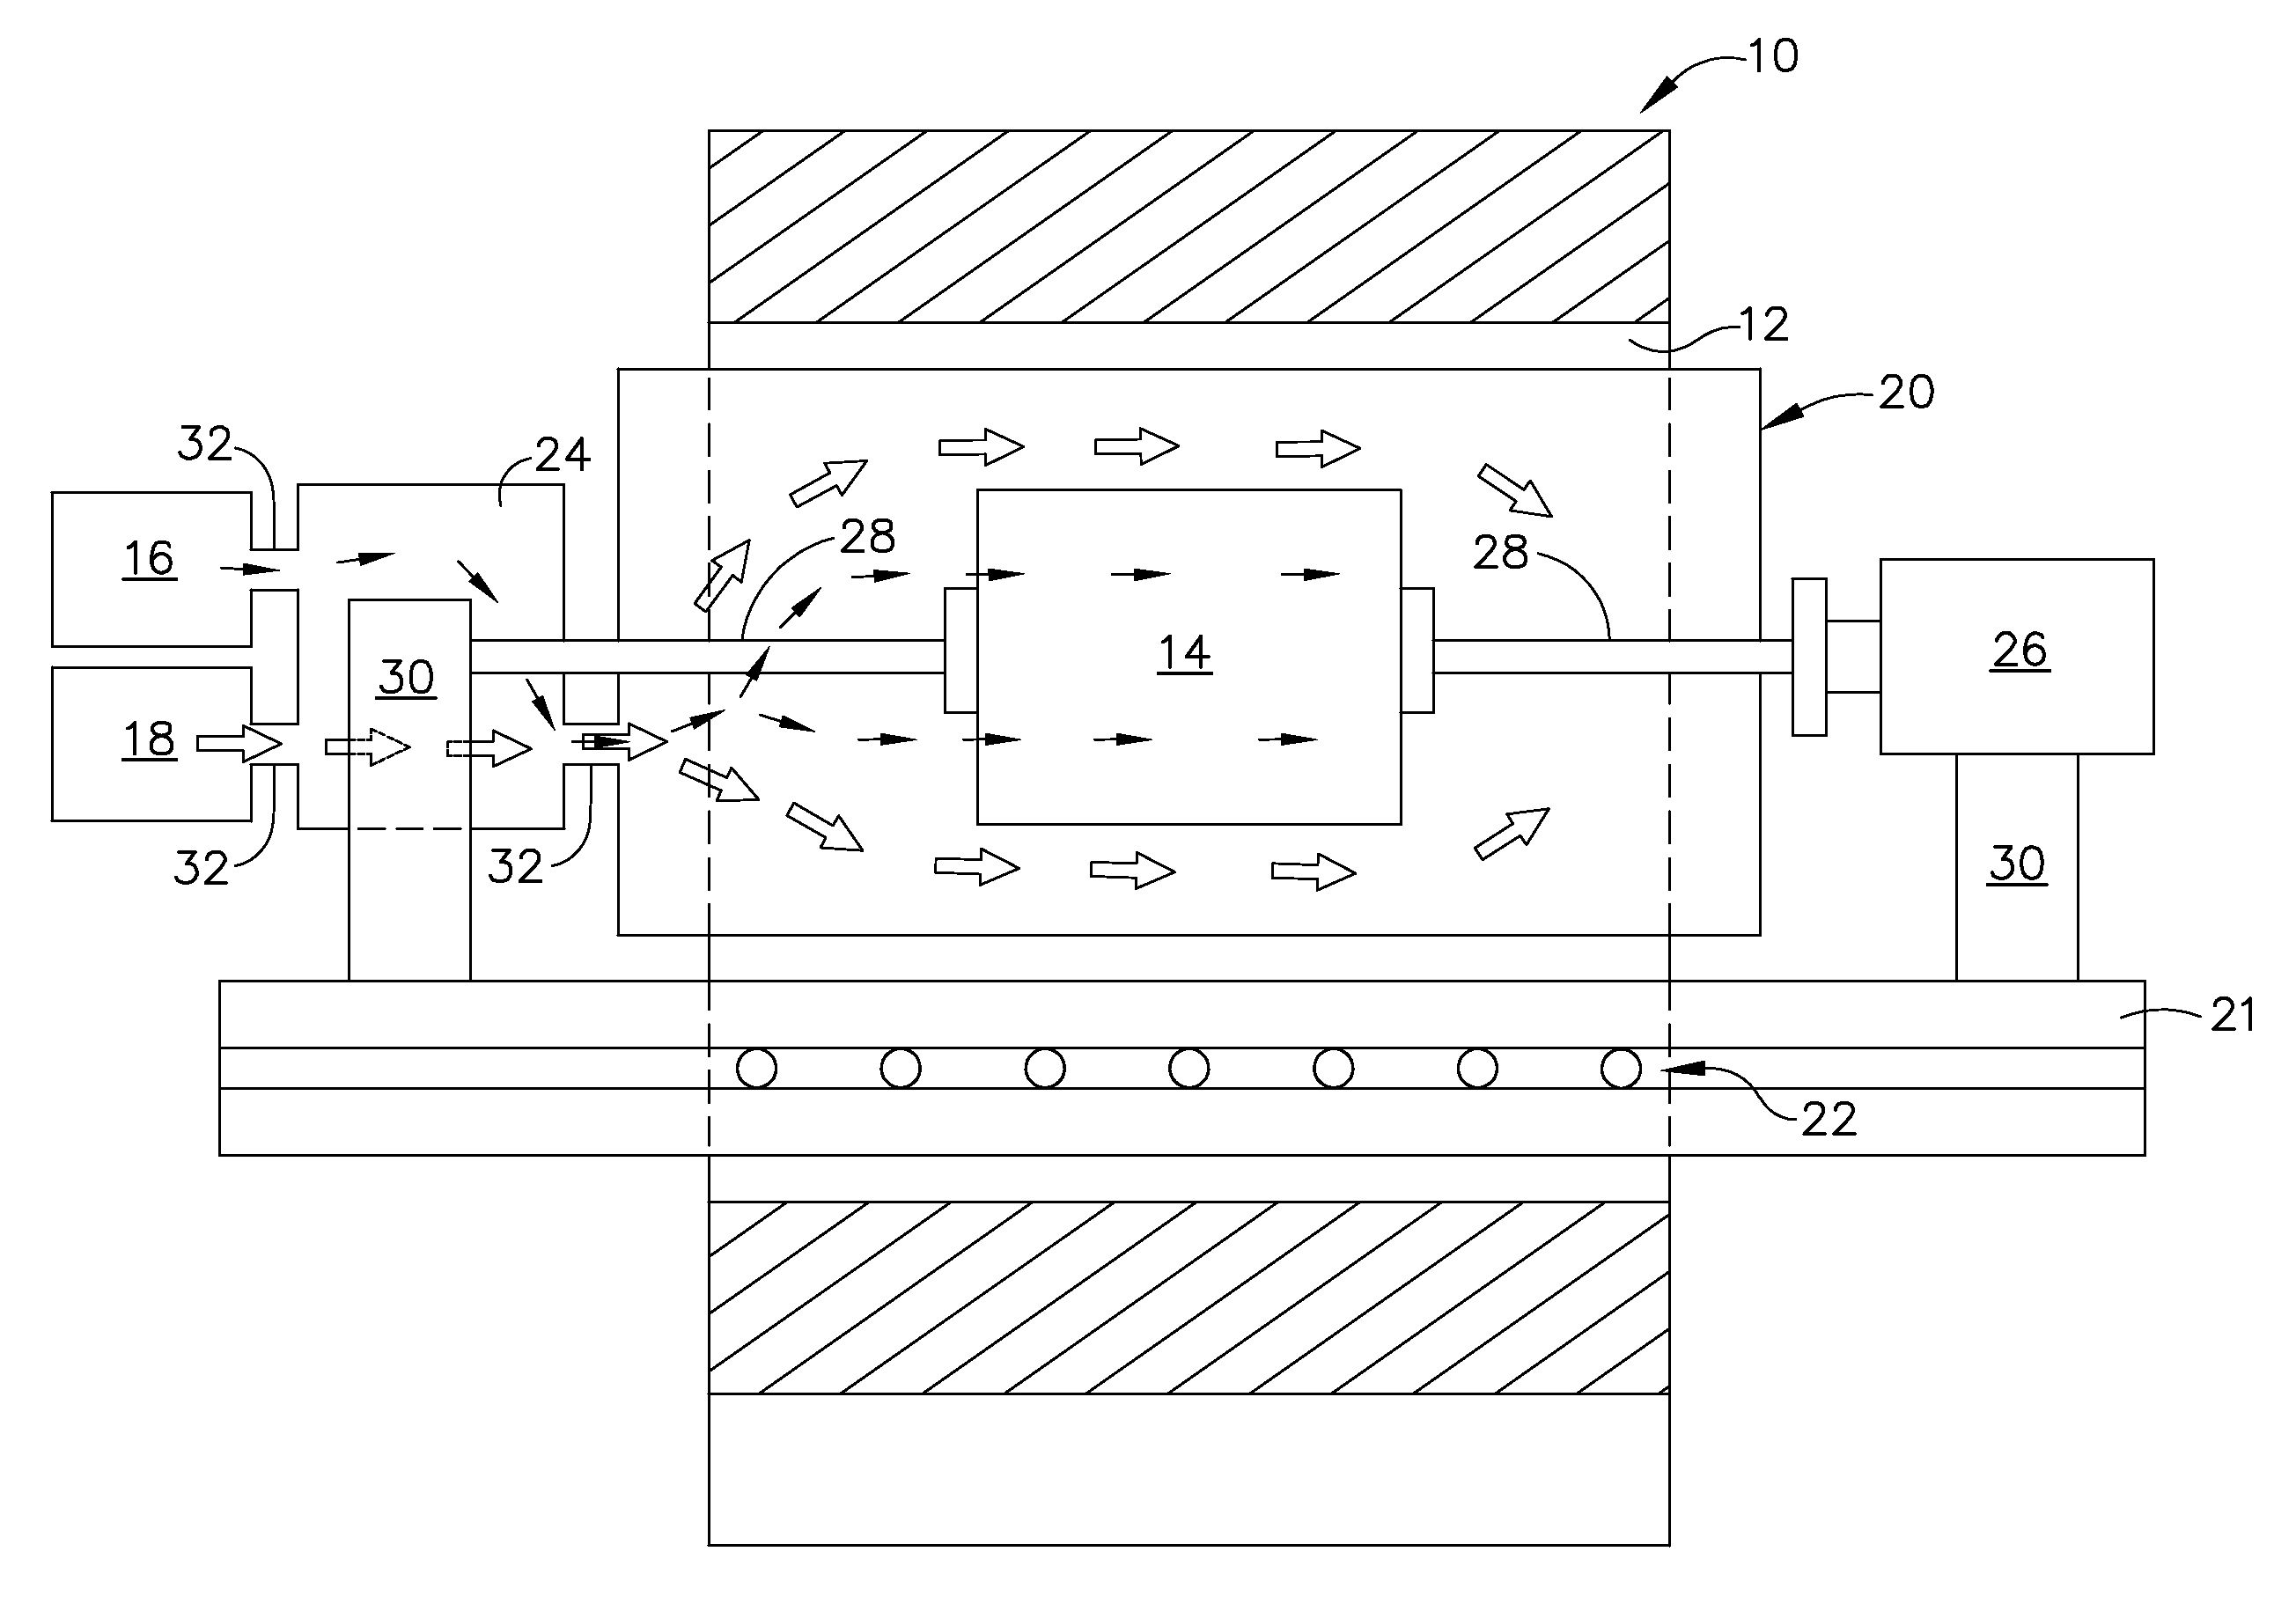 Methods for optimizing parameters of gas turbine engine components